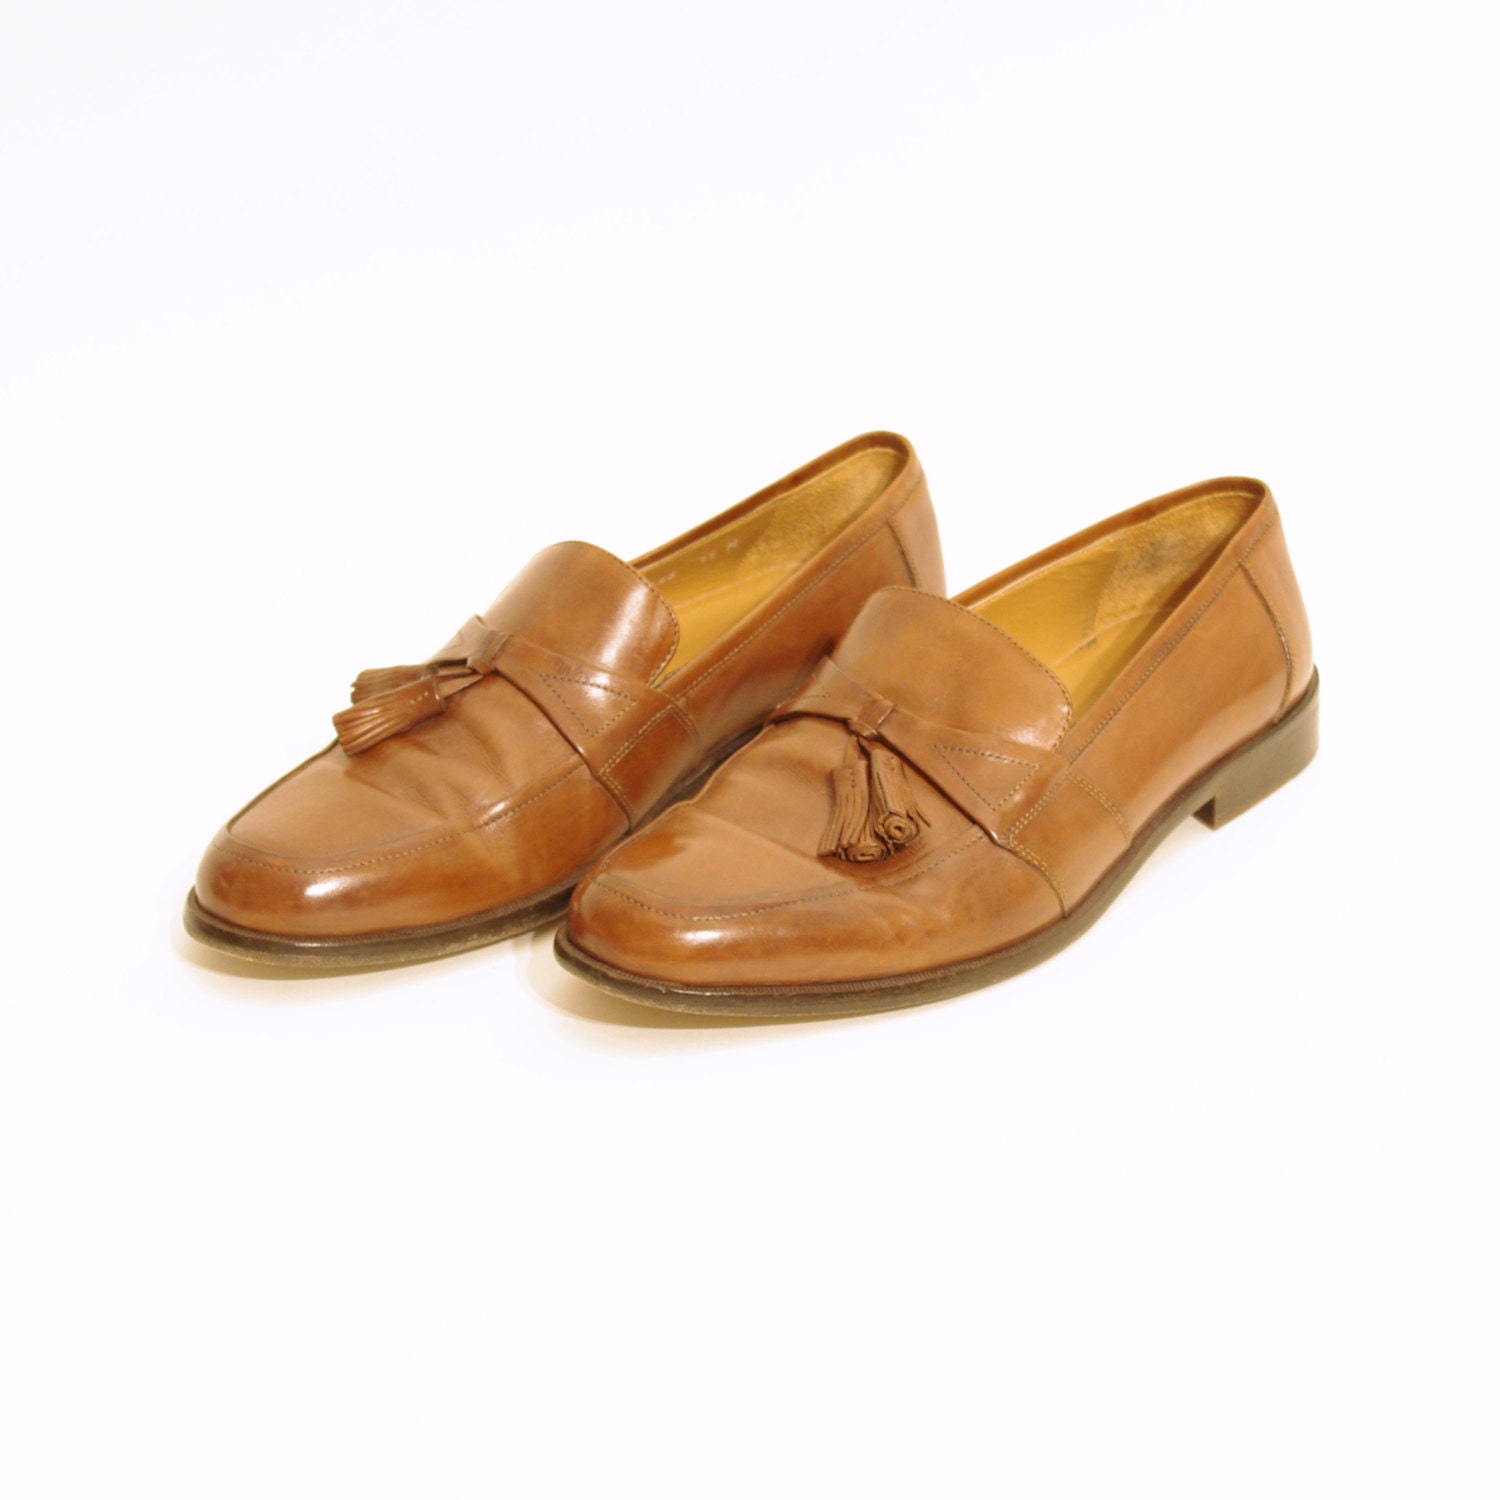 Vintage Johnston and Murphy Italian Shoes by ThisCharmingManCave